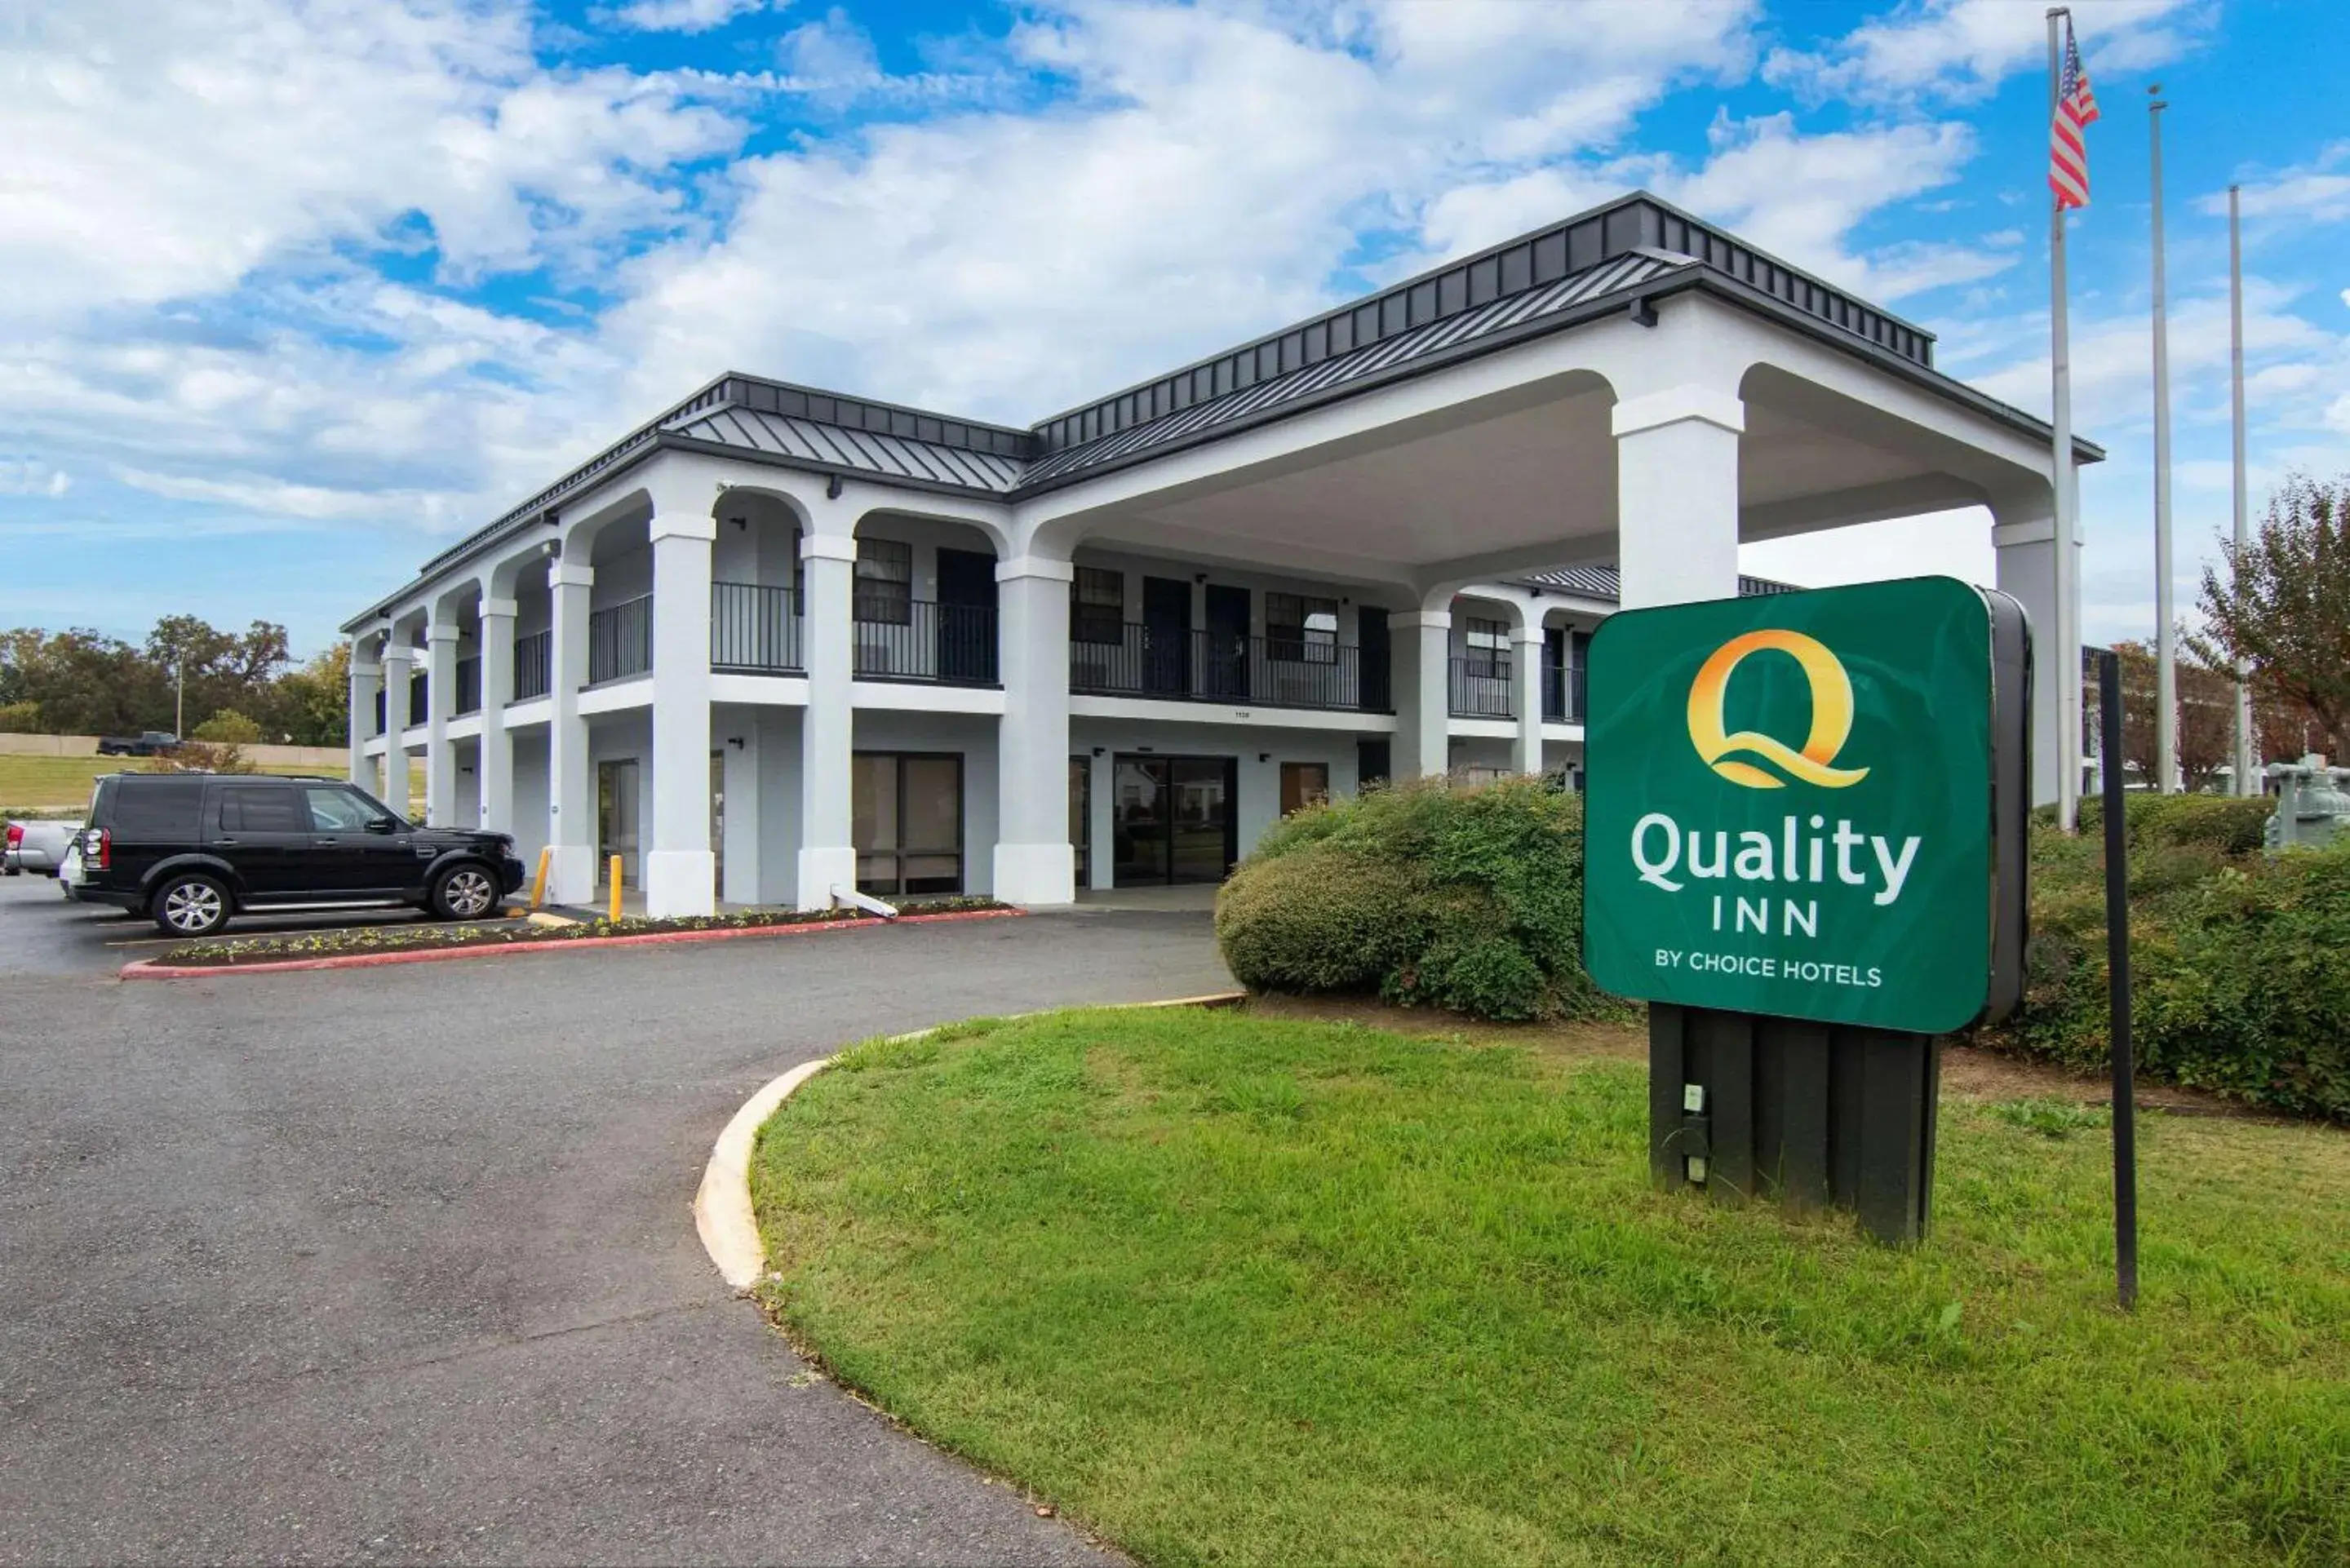 Property Building in Quality Inn near Casinos and Convention Center